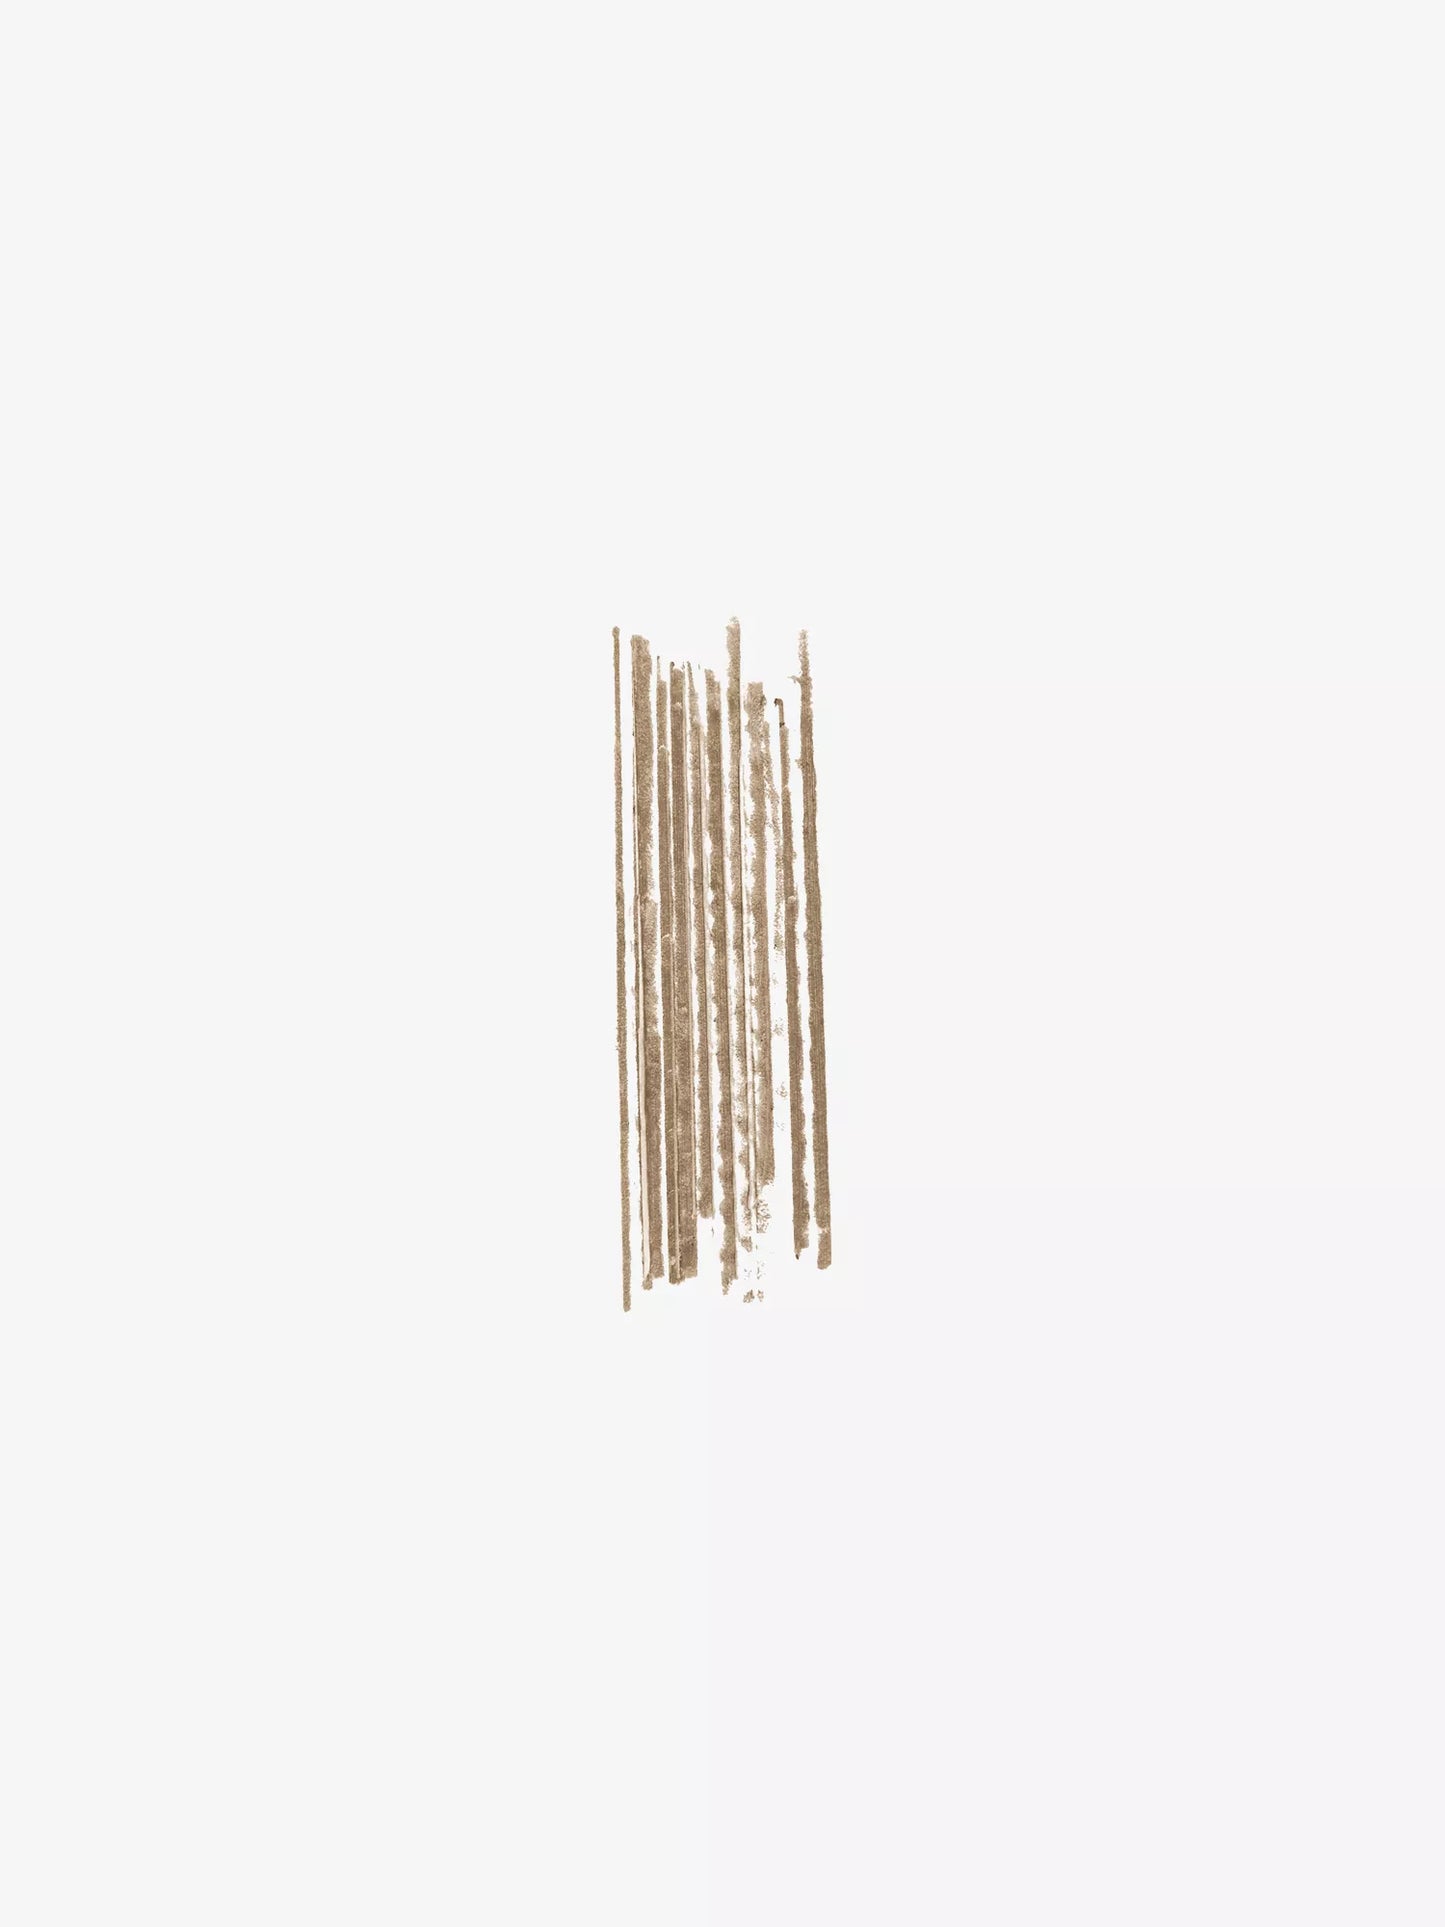 Bobbi Brown Perfectly Defined Long-wear Brow Refill 12 Sandy Blonde .33g